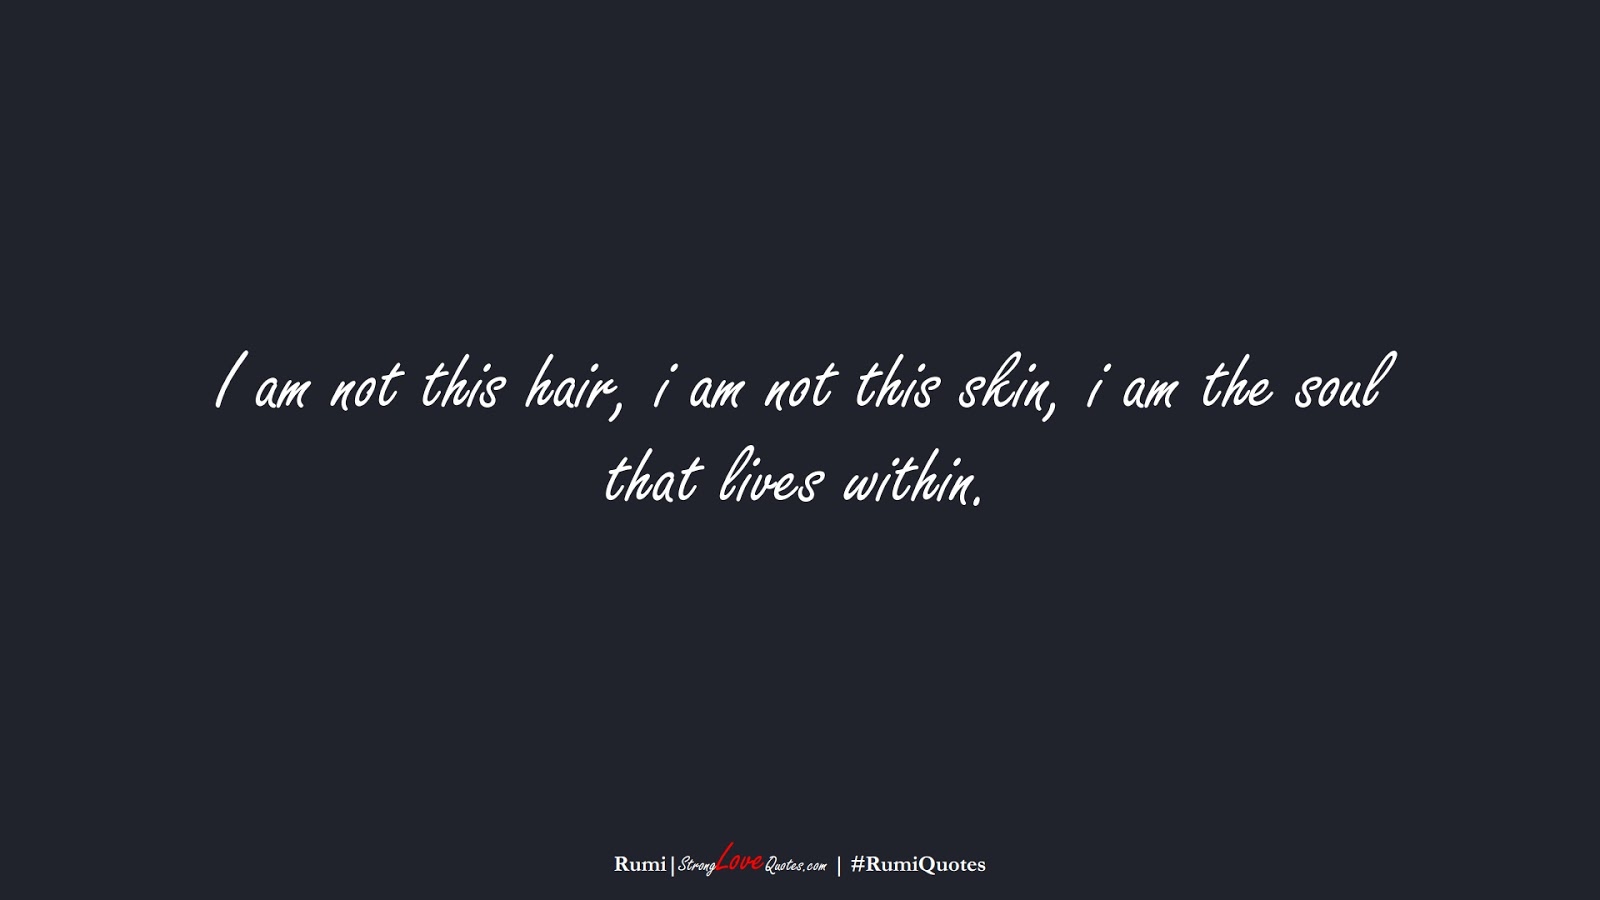 I am not this hair, i am not this skin, i am the soul that lives within. (Rumi);  #RumiQuotes